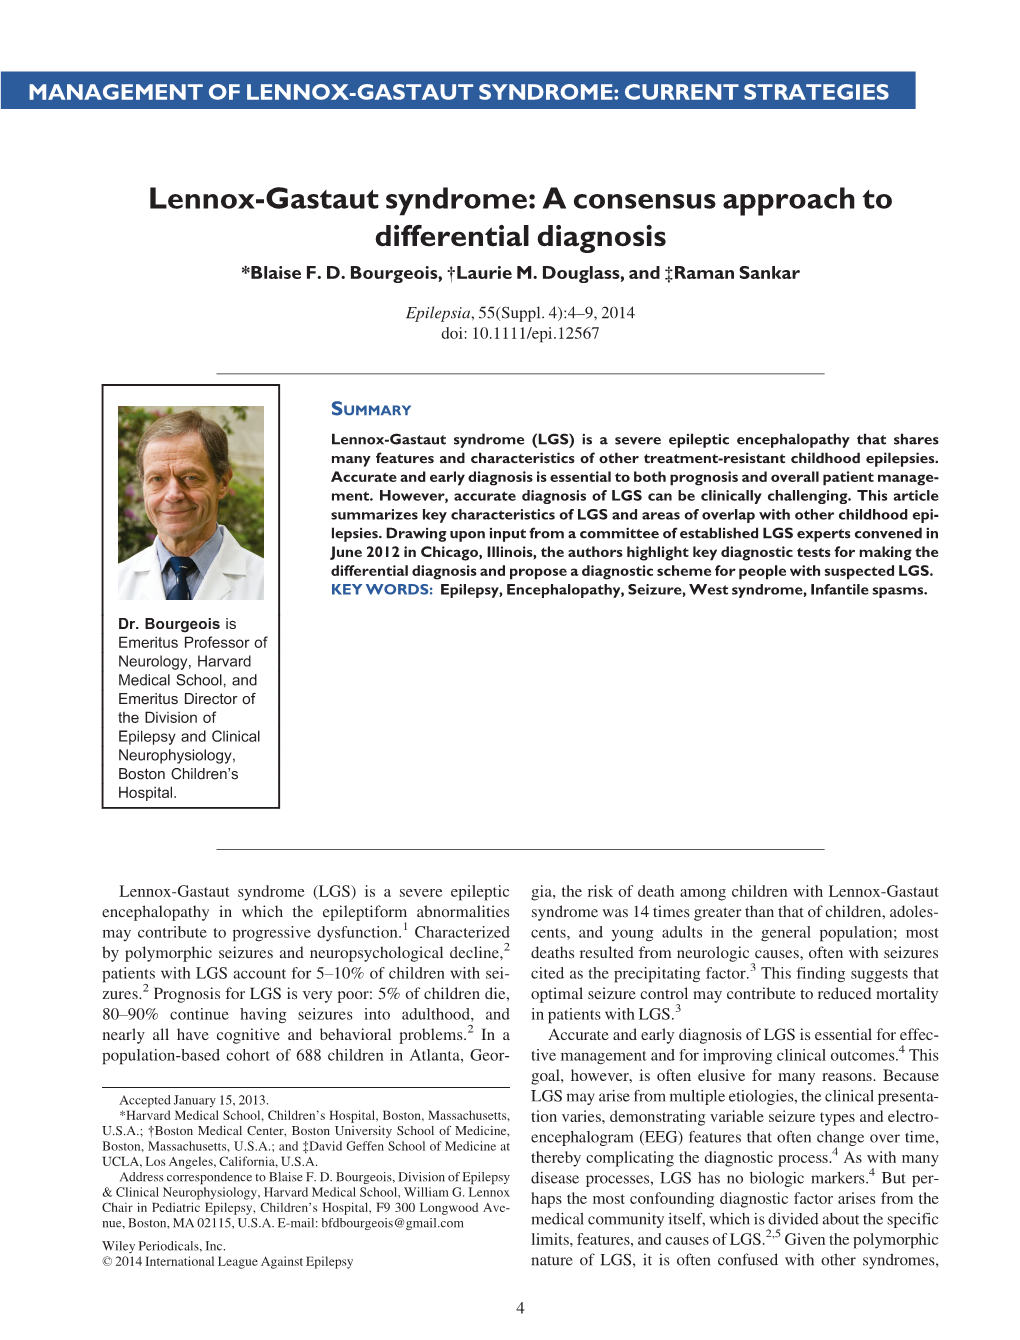 Lennox-Gastaut Syndrome: Current Strategies